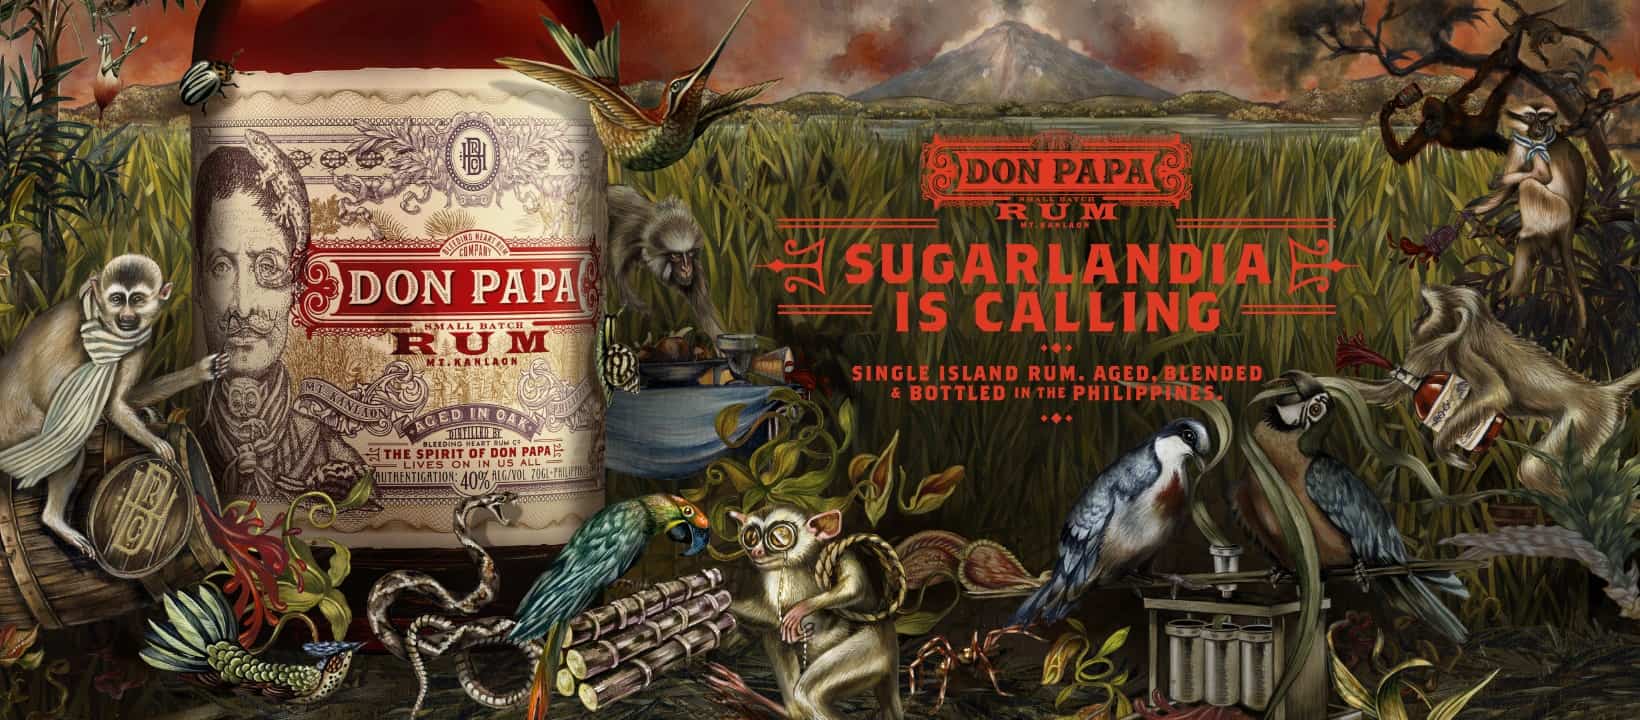 Culture Spi' : "Don Papa, Welcome to Sugarlandia"